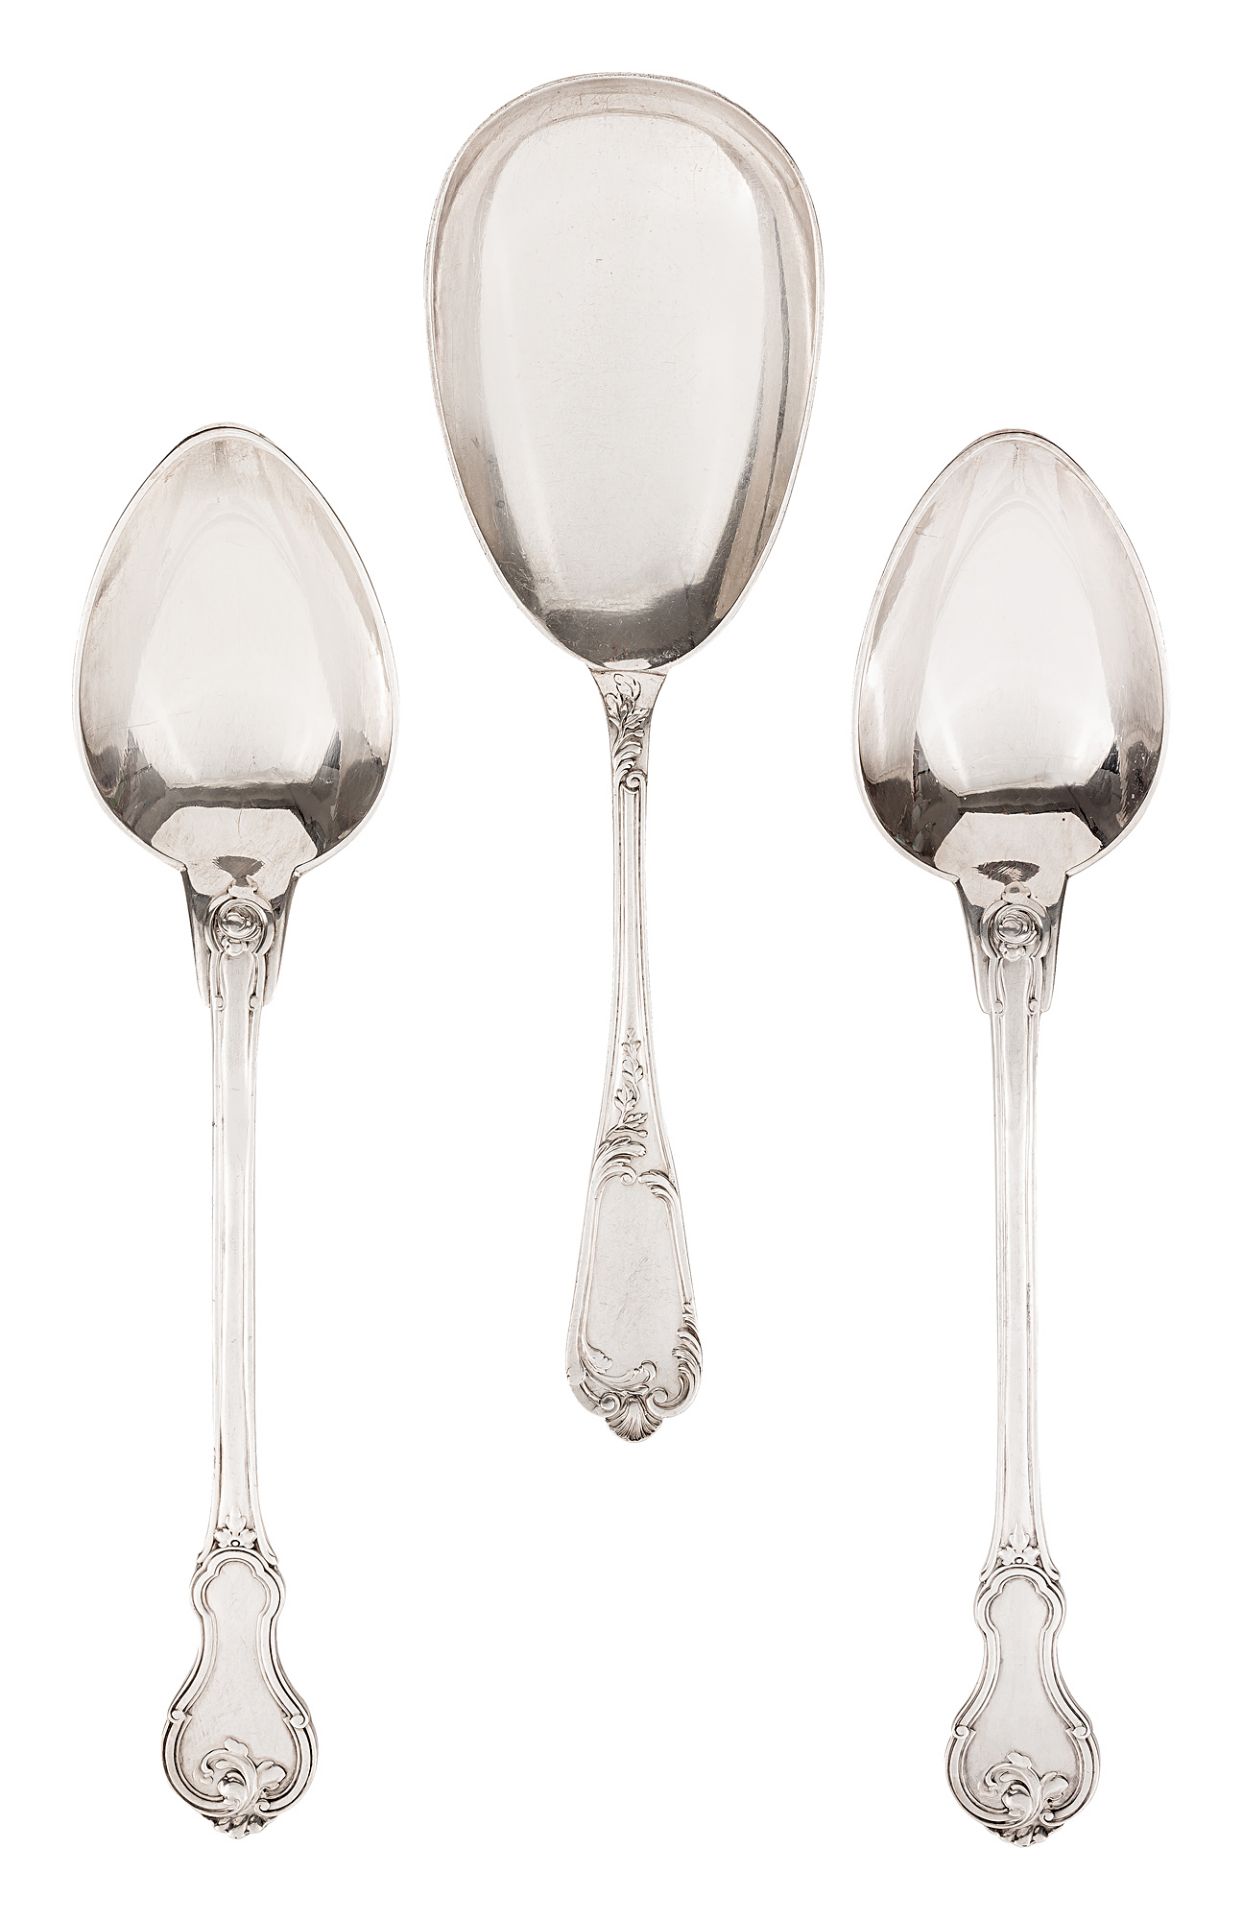 Three large serving spoons